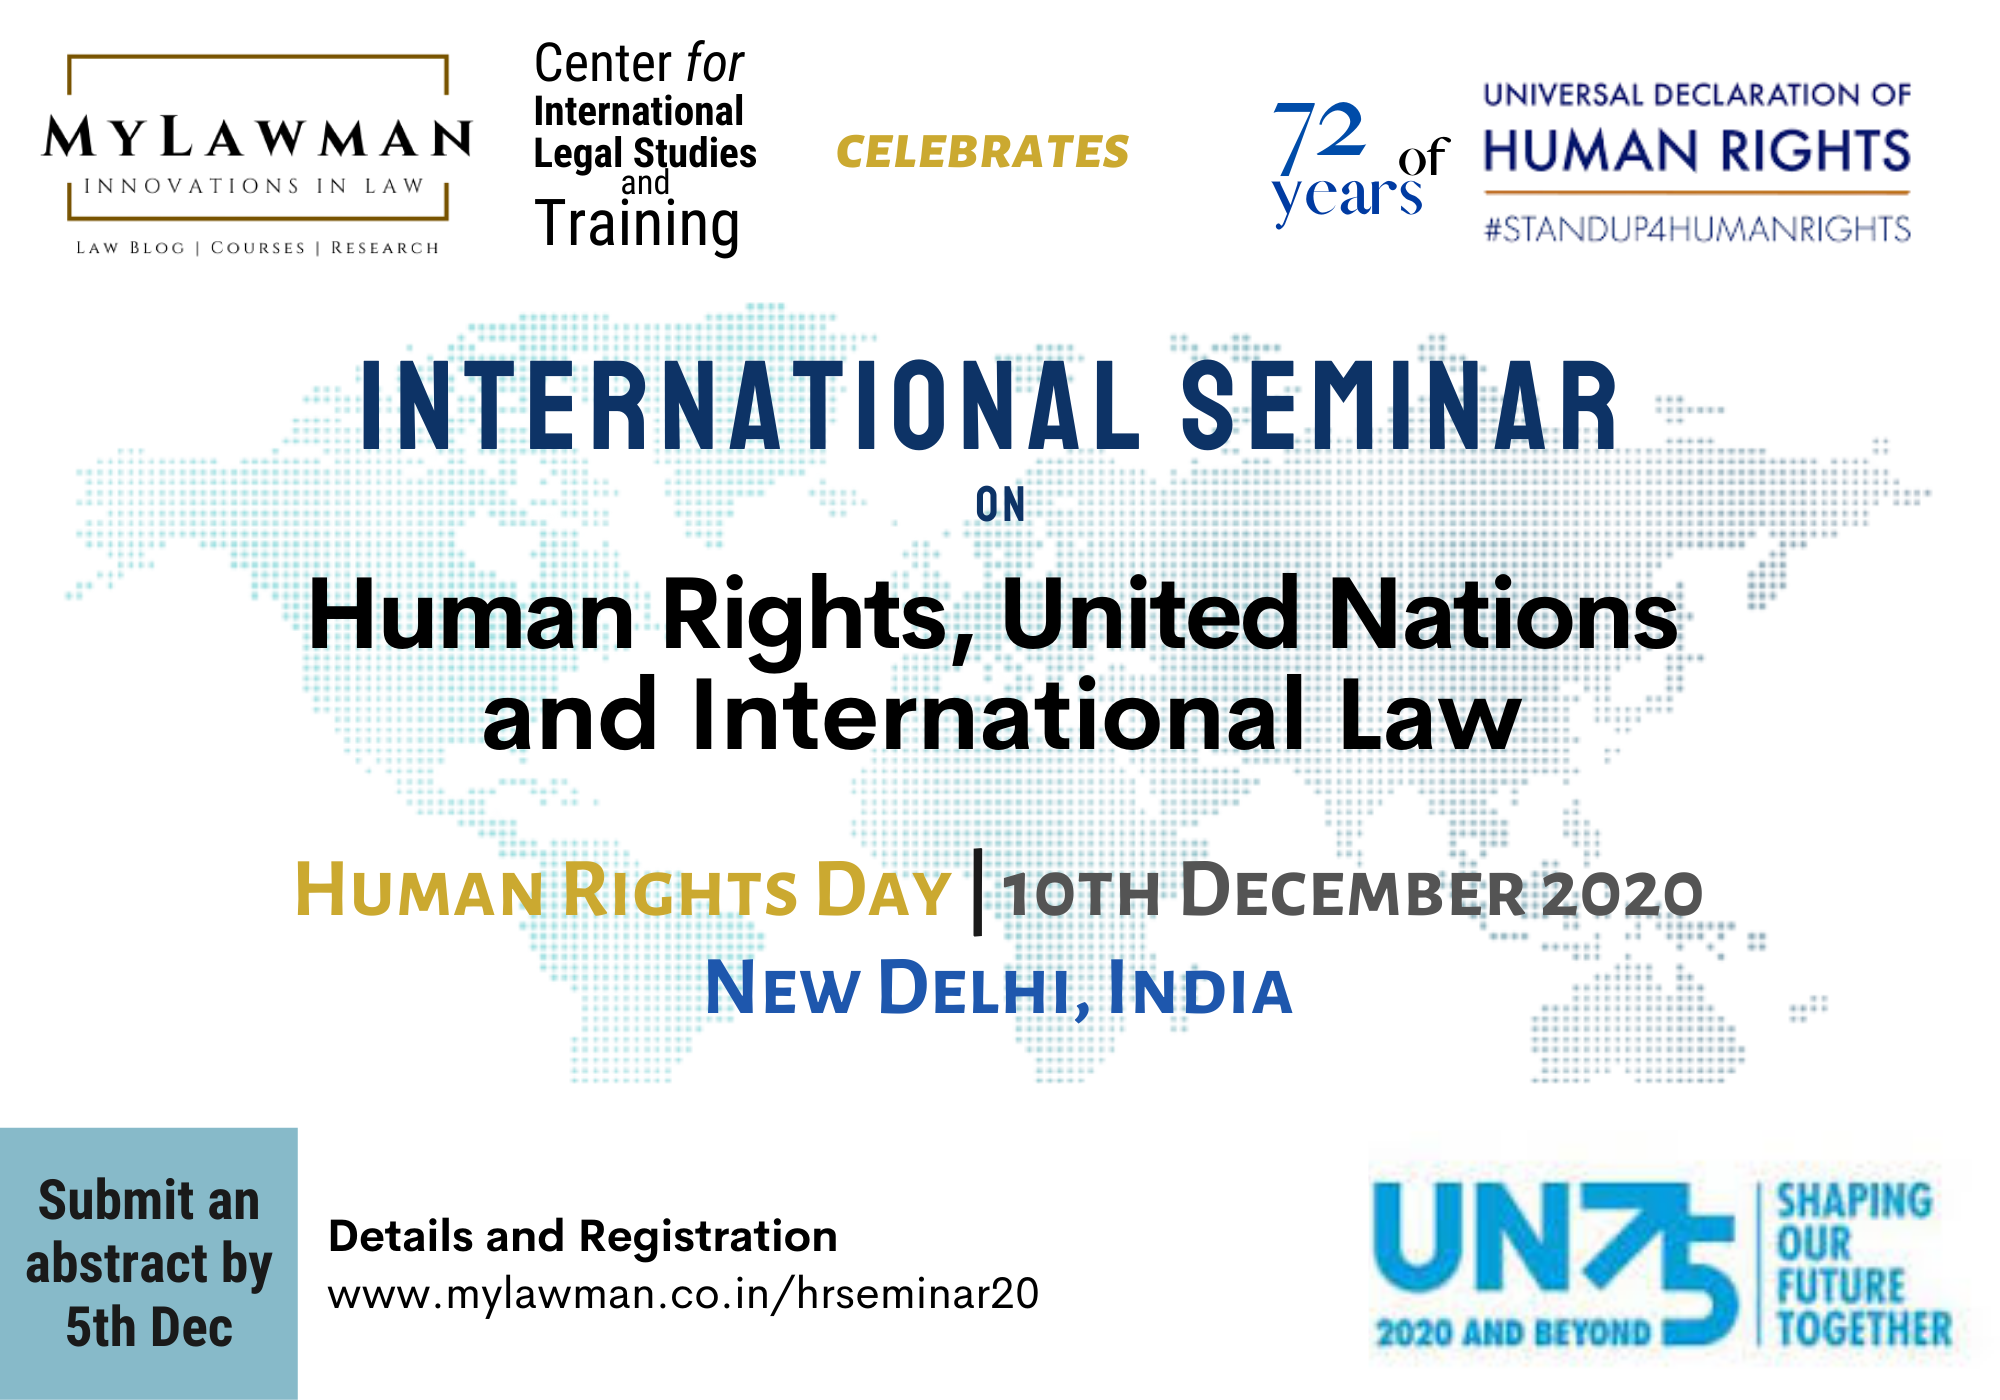 [Call for Paper] International Seminar on Human Rights & International Law on Human Rights Day (10 Dec) by MyLawman [Submit Abstract by 5 Dec]